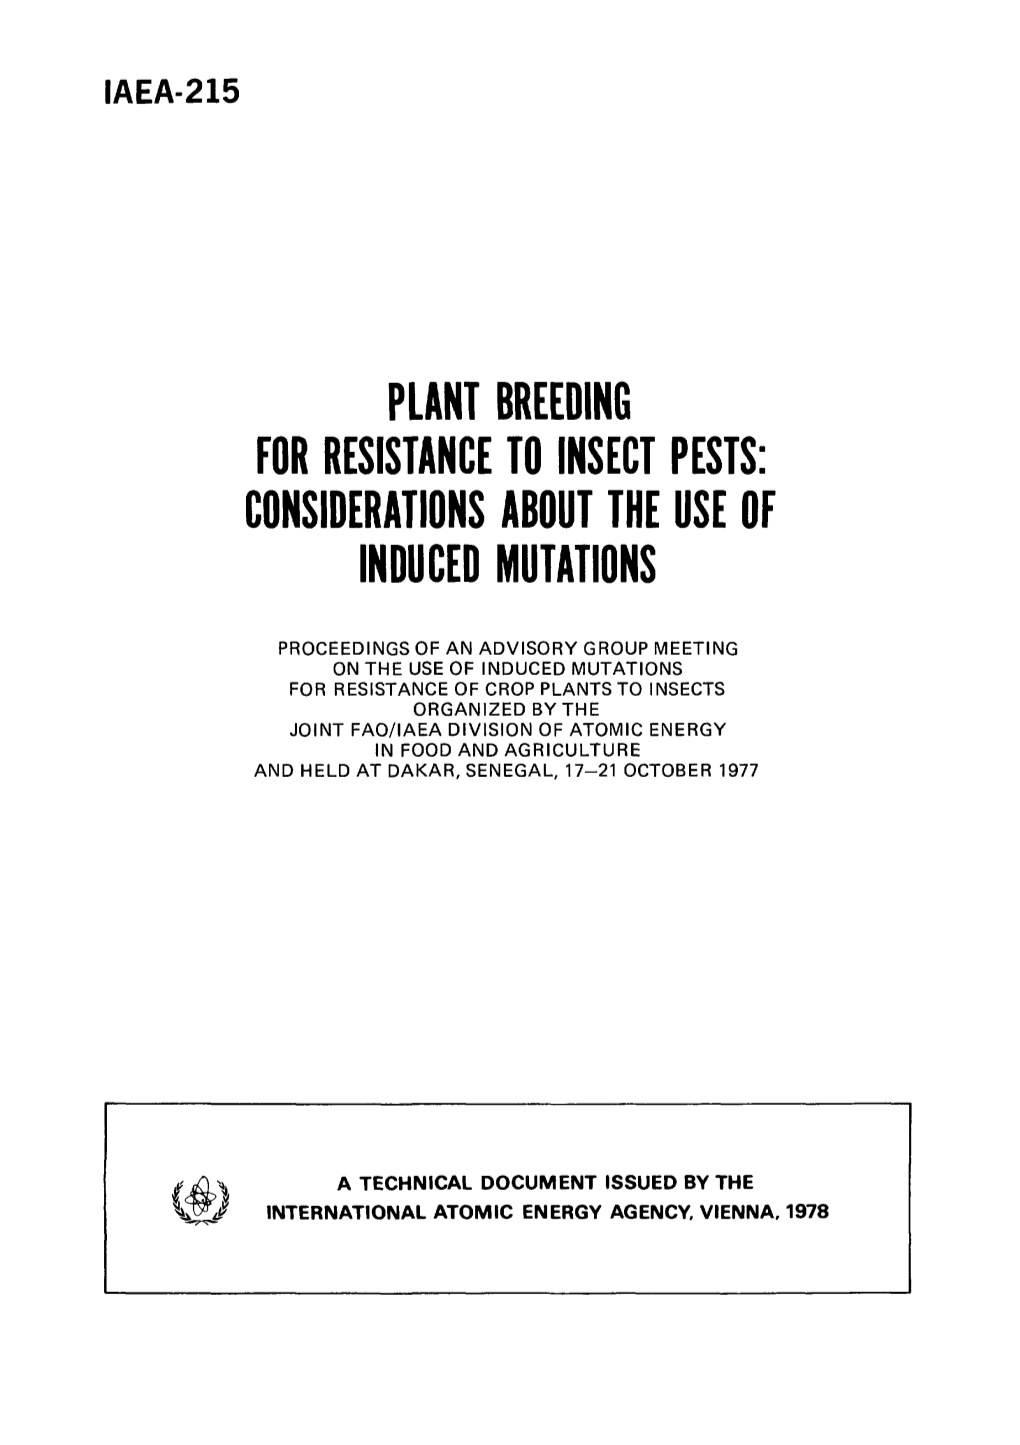 Plant Breeding for Resistance to Insect Pests: Considerations Adout the Use of Induced Mutations